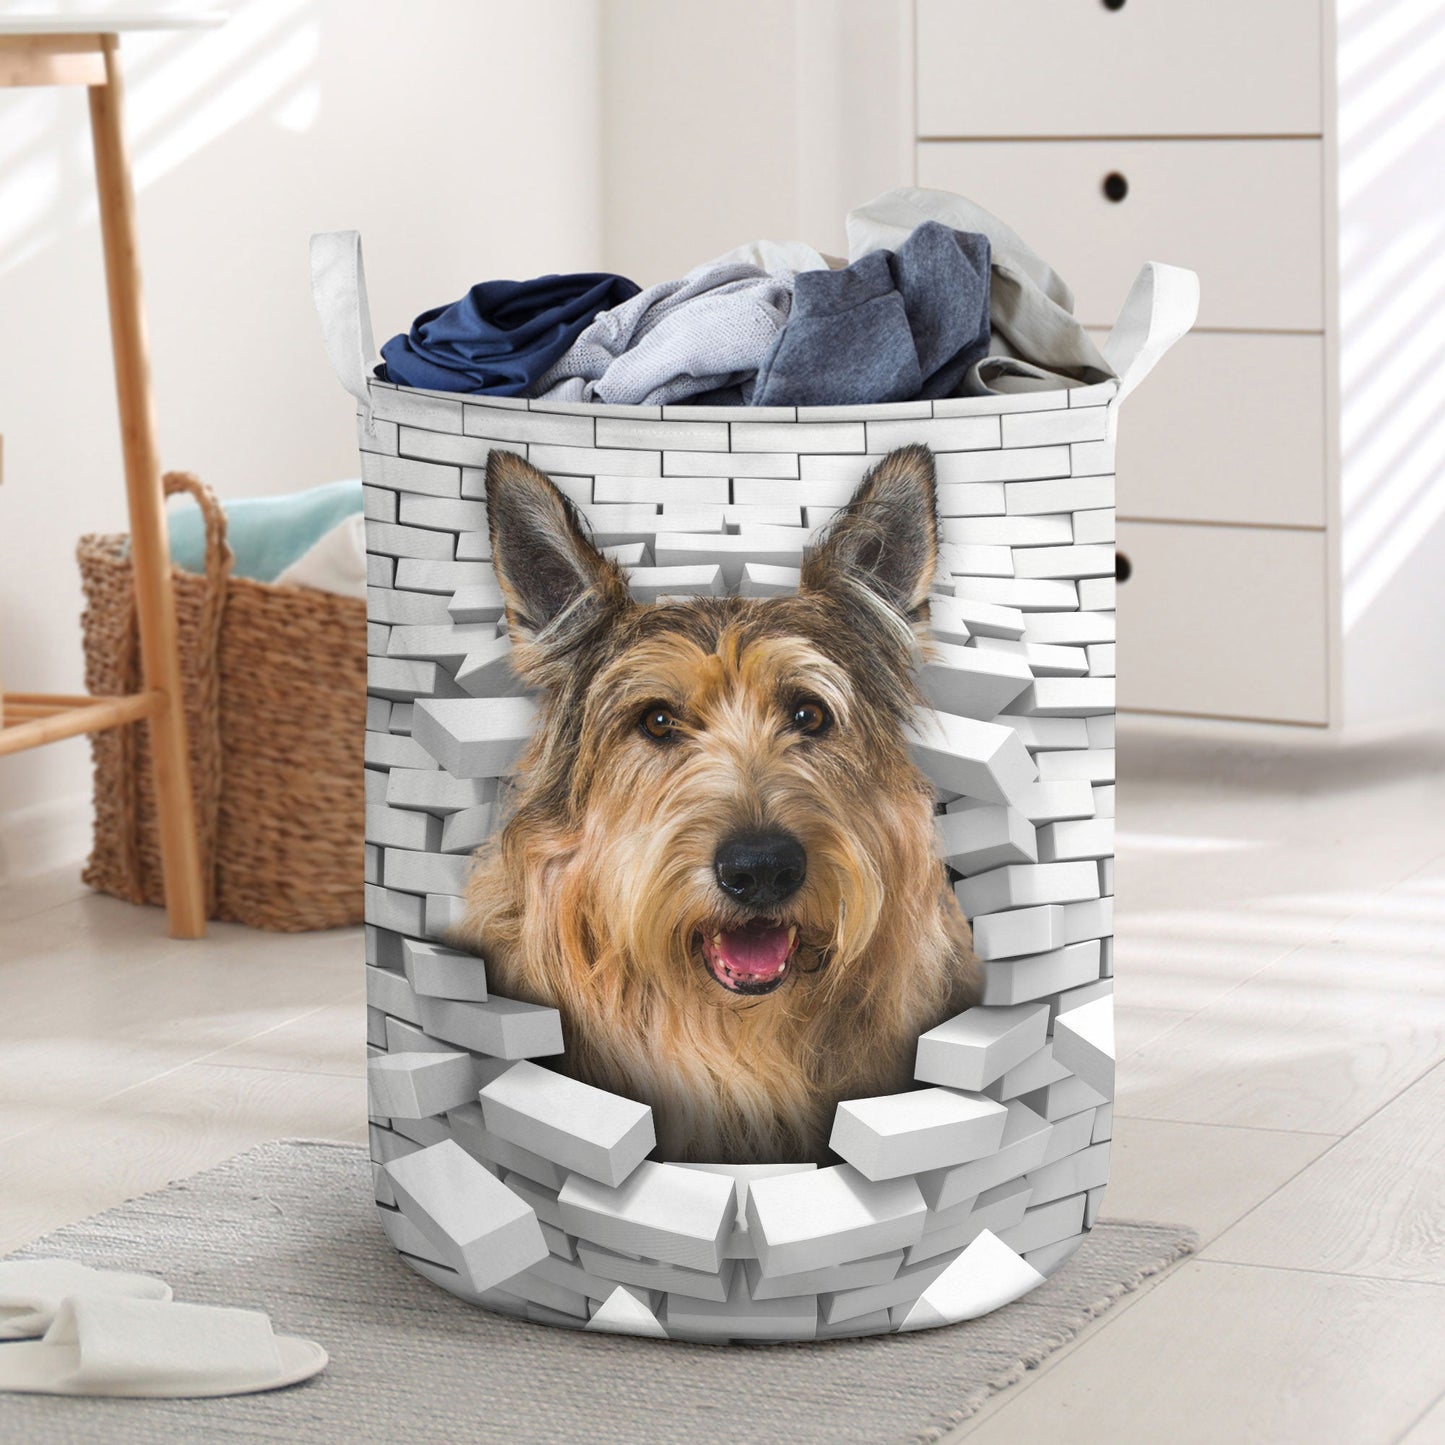 Berger Picard - In The Hole Of Wall Pattern Laundry Basket